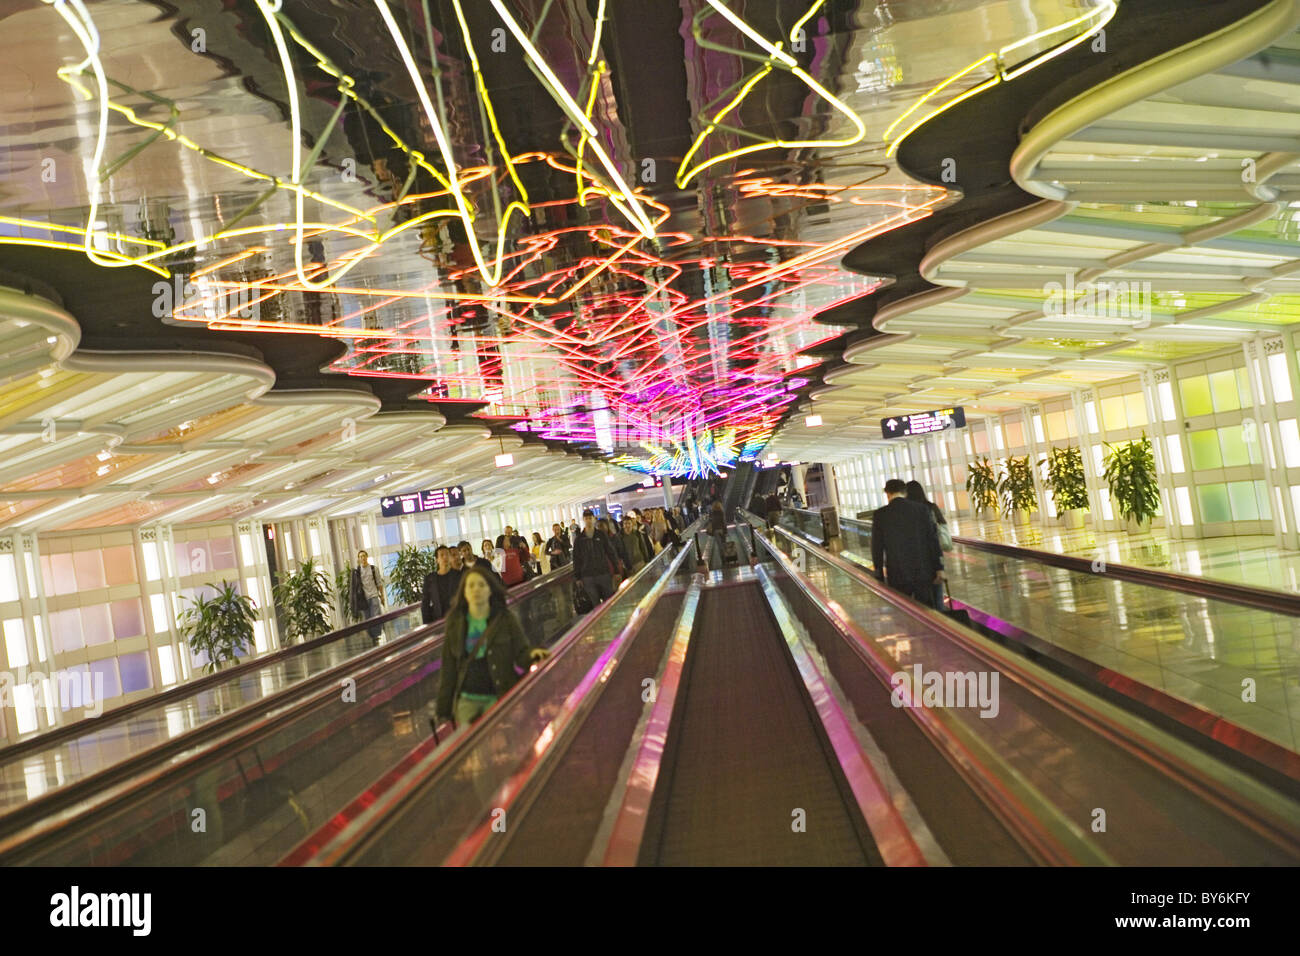 Light sculptures and moving walkway at O'Hare International Airport, Chicago, Illinois, USA Stock Photo